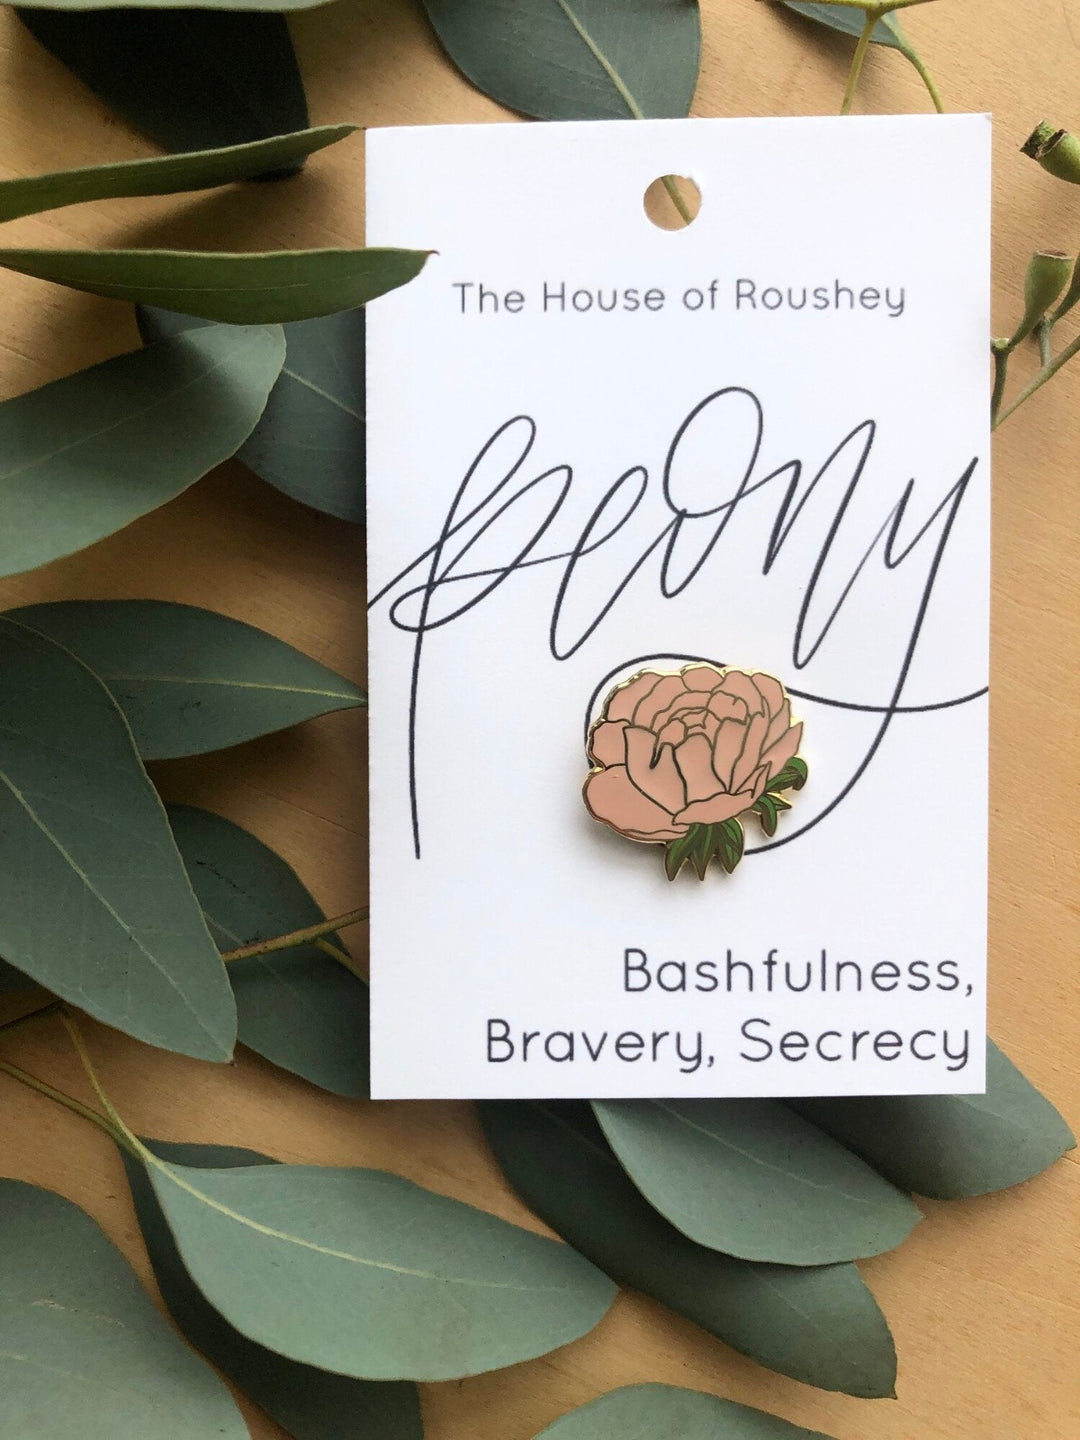 Enamel Pins by Christy Roushey | The House of Roushey, Pink Peony Pin. The bottom of the packaging reads "Bashfulness, Bravery, Secrecy".